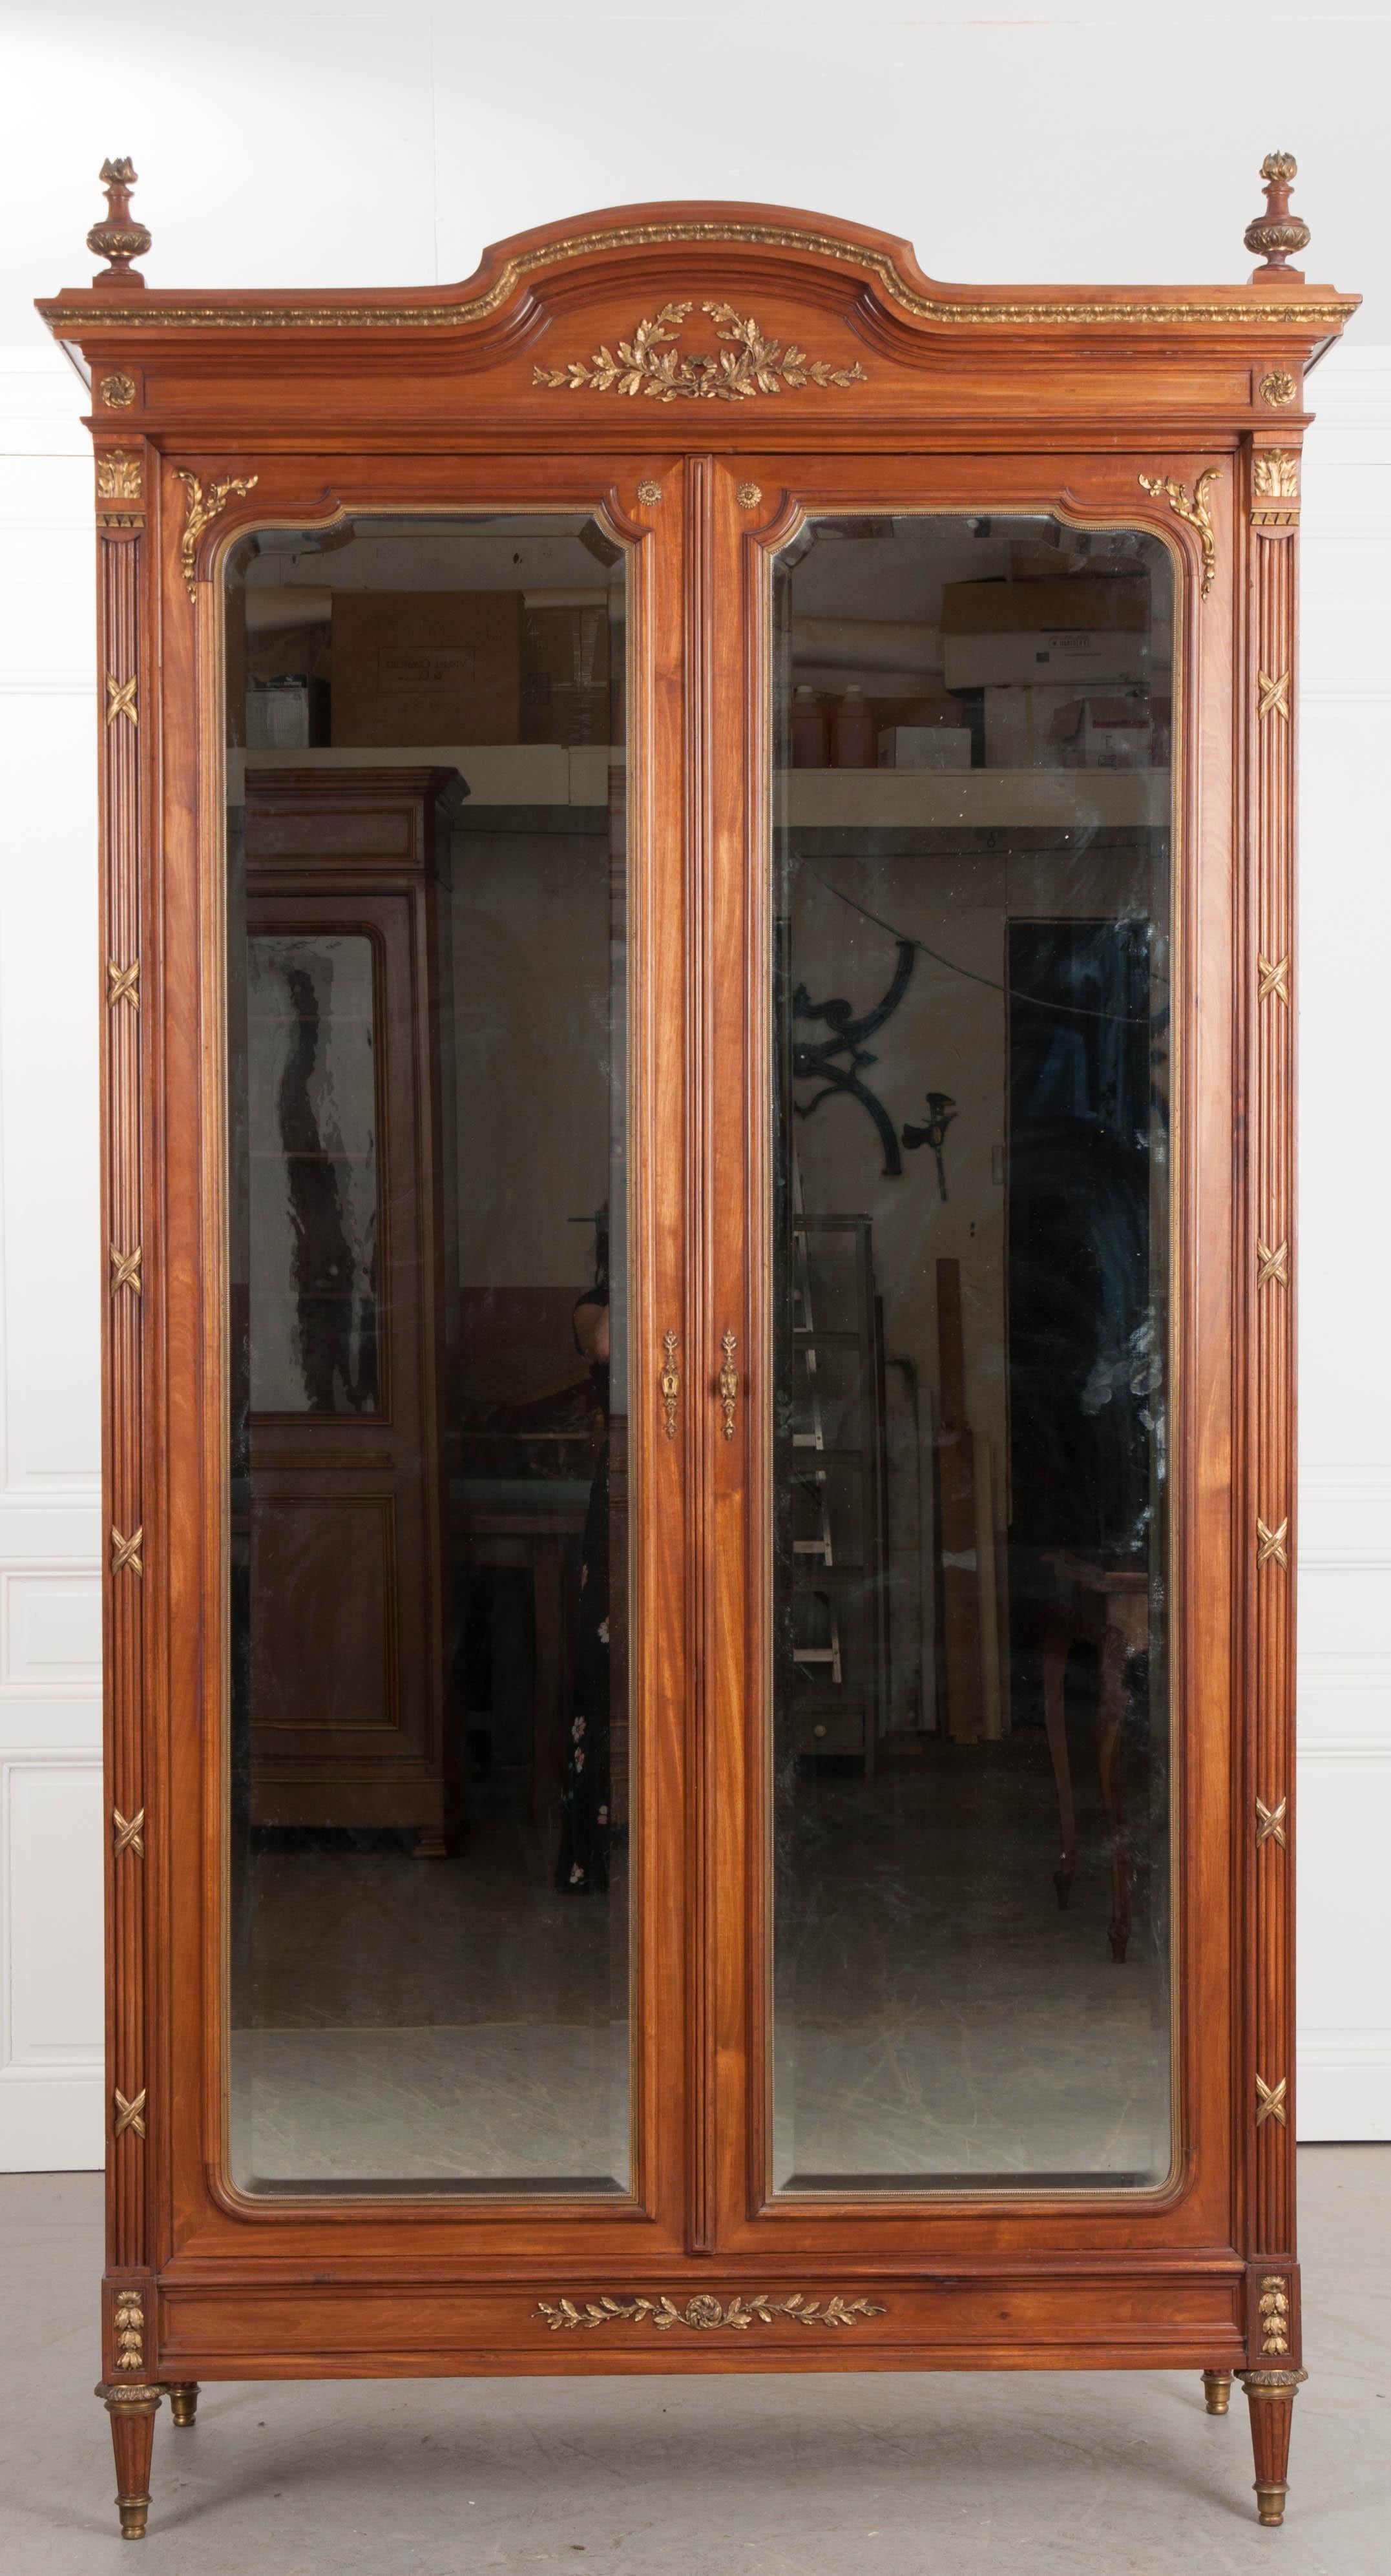 A handsome Louis XVI-style armoire, with mirrored doors, from 19th century France. The brass-trimmed and shaped cornice is bedecked with urn and flame finials on top, and a gilt brass ribboned wreath found in the frieze. The tall doors have shaped,